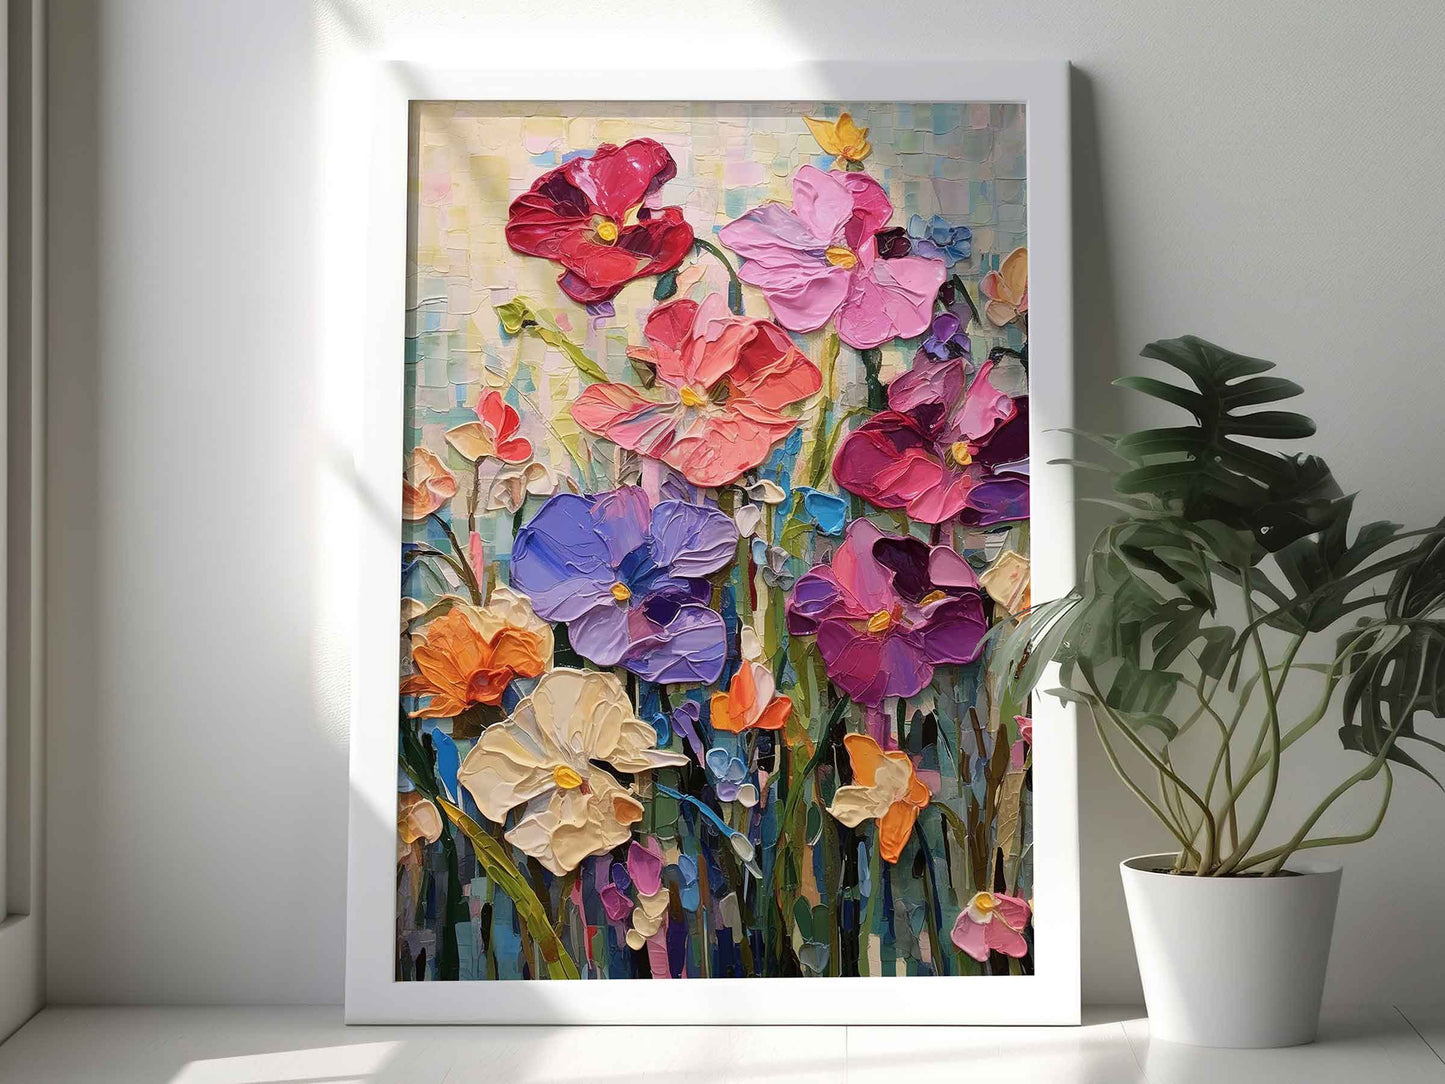 Framed Image of Colourful Flowers Oil Painting Wall Art Prints Palette Thick Impasto